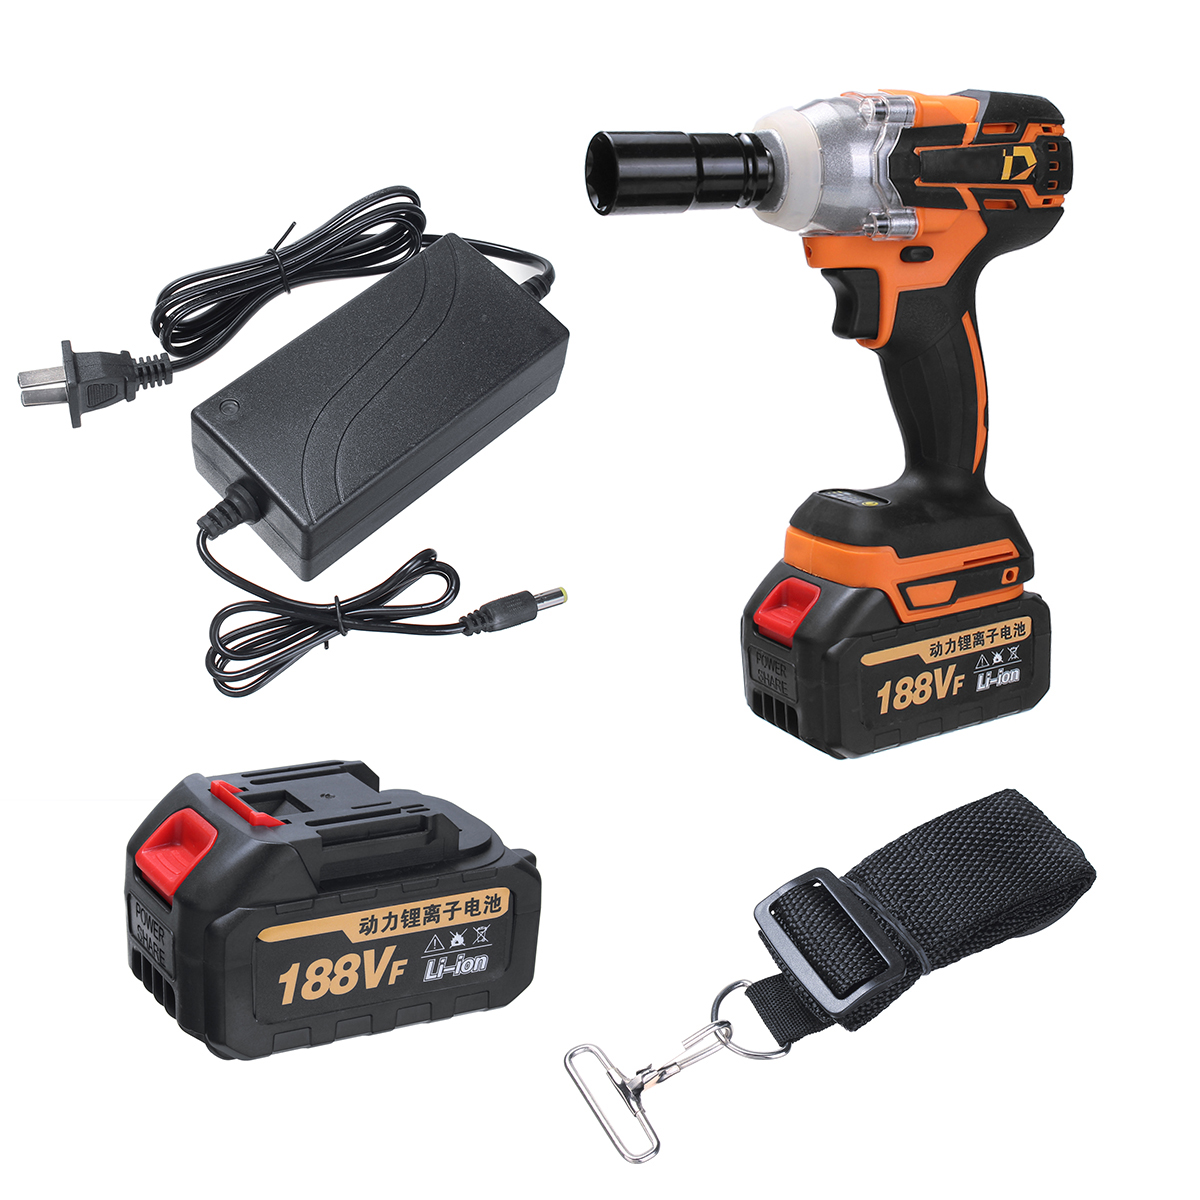 188VF-380Nm-12quot-Brushless-Cordless-Electric-Impact-Wrench-15000mAH-2x-Battery-1573435-4